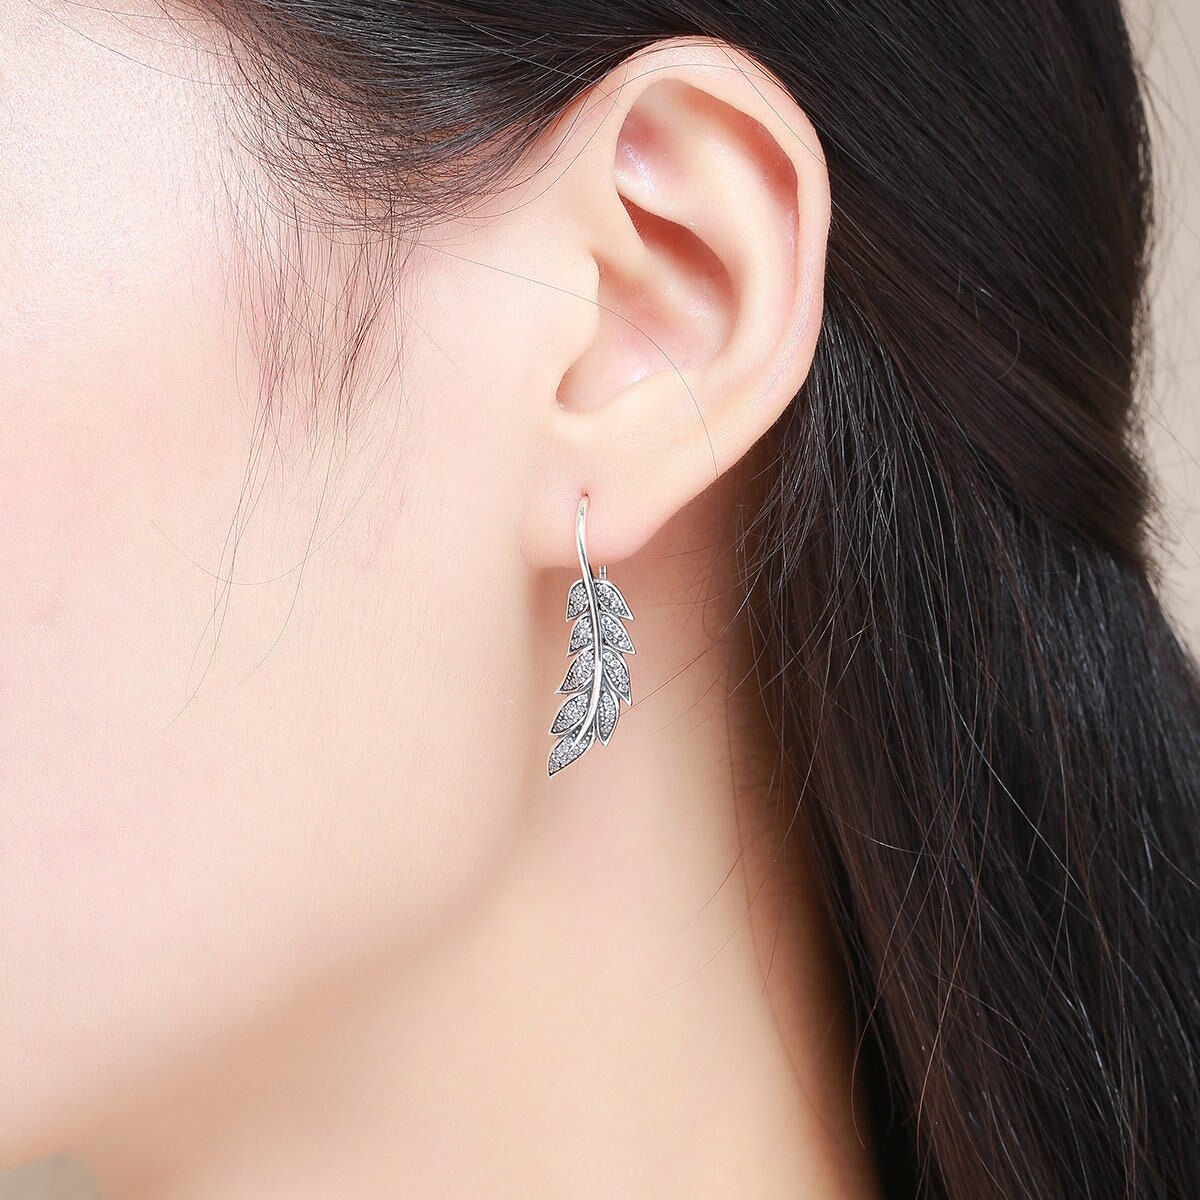 925 Sterling Silver Feather Earrings, Cz Feather Earrings, Silver Cz Earrings, Minimalist Earrings, Dainty Earrings, Silver Dangle Earrings